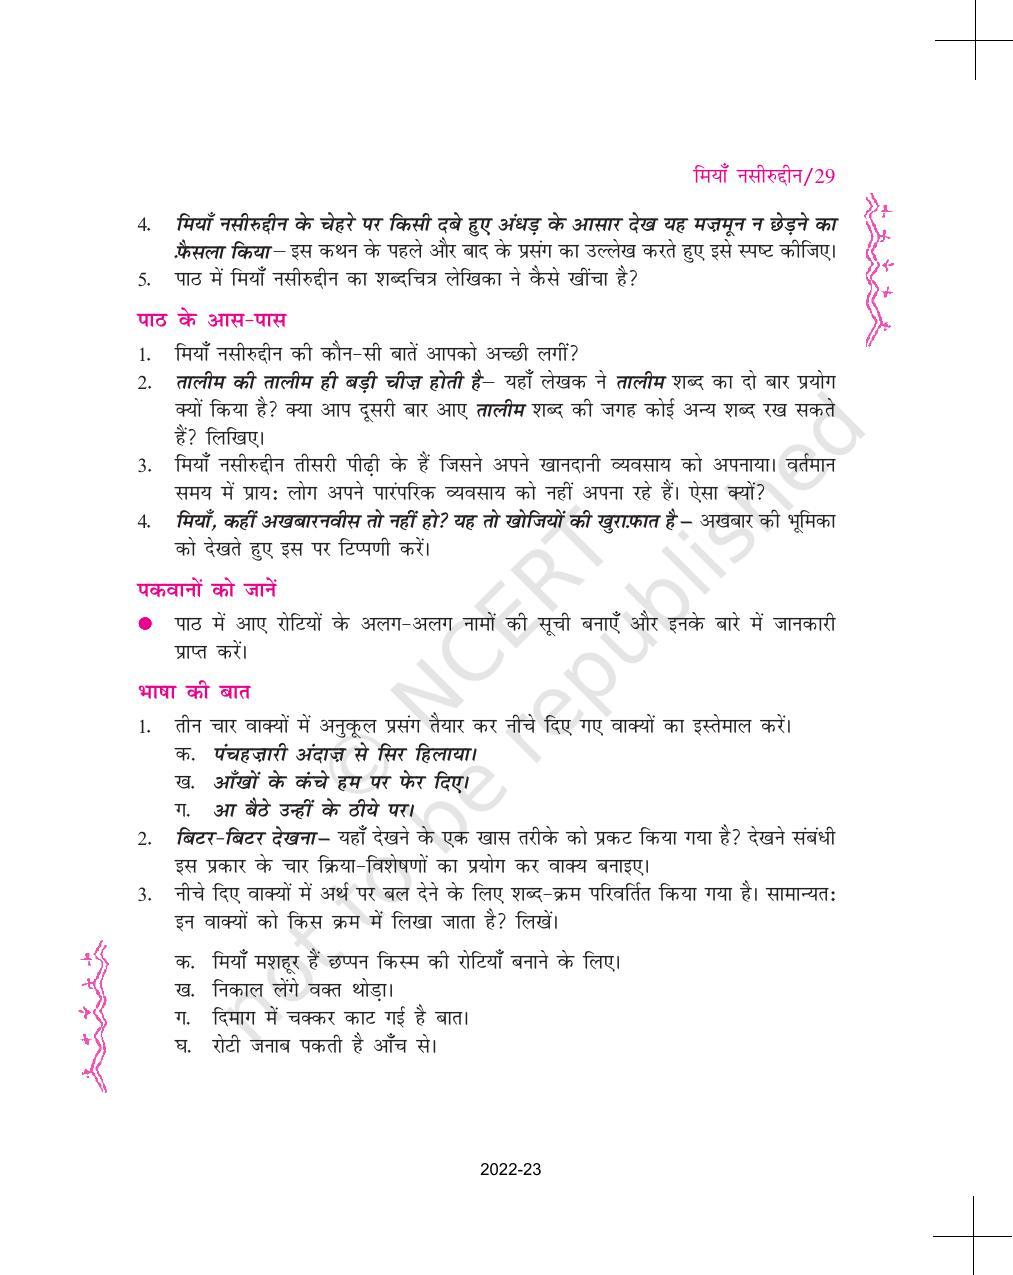 NCERT Book for Class 11 Hindi Aroh Chapter 2 मियाँ नसीरुद्दीन - Page 10